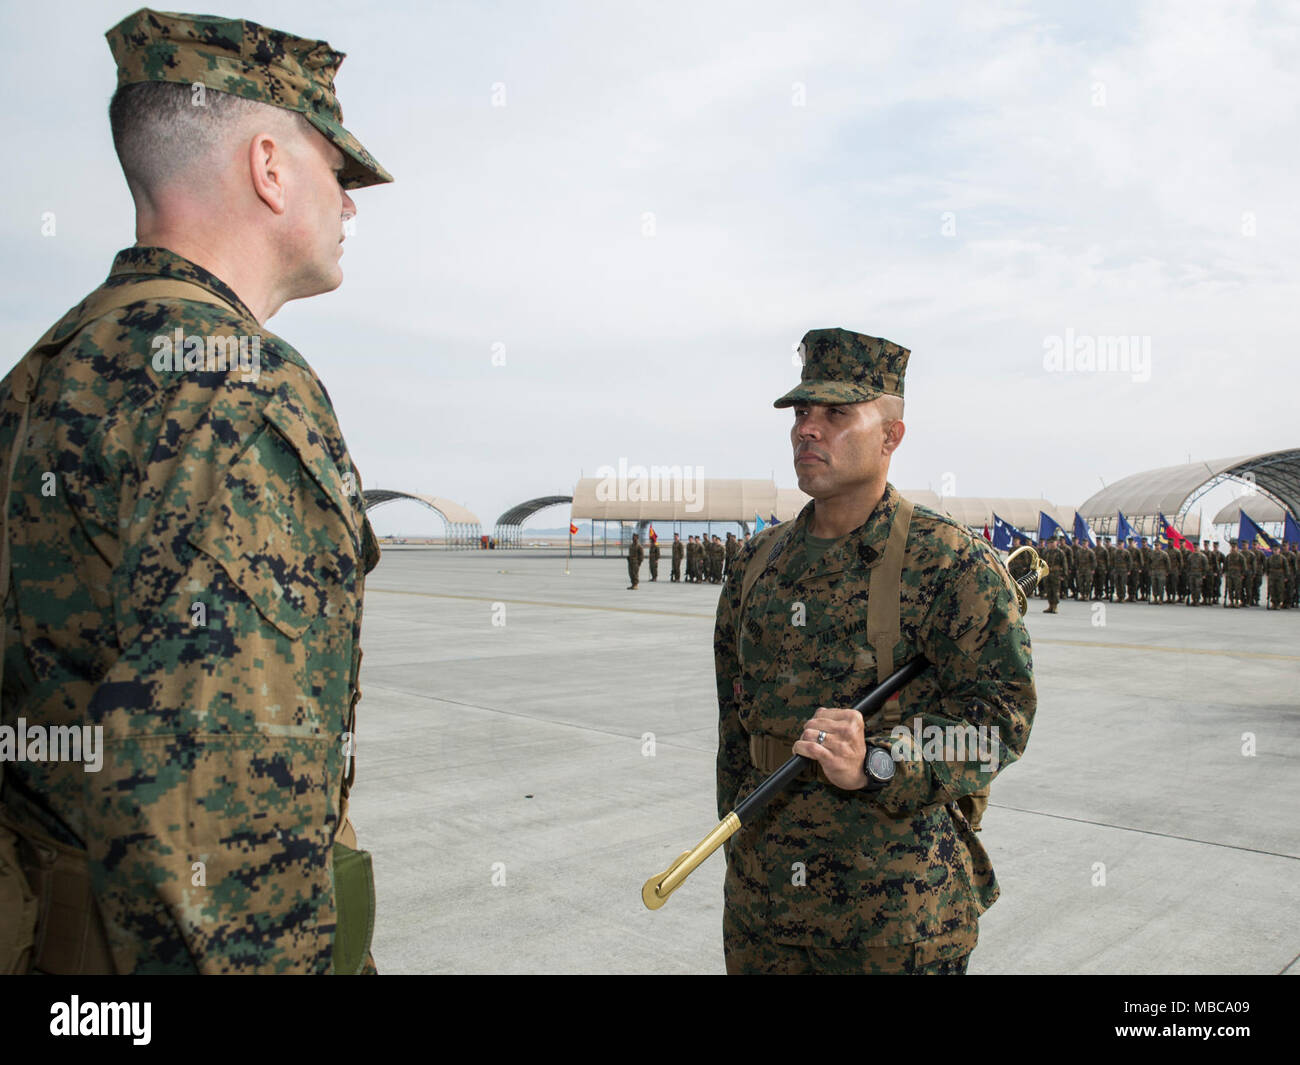 U.S. Marine Corps Sgt. Maj. Edwin Mota, outbound sergeant major for Marine Aviation Logistics Squadron (MALS) 12, prepares to relinquish the sword of office to Lt. Col. John Fallow, commanding officer for MALS-12, during a relief ceremony at Marine Corps Air Station Iwakuni, Japan, Feb. 16, 2018. The ceremony symbolized the end of Mota’s role as MALS-12 sergeant major. He is slated to report to Okinawa, where he will be appointed as the sergeant major for the 31st Marine Expeditionary Unit. (U.S. Marine Corps Stock Photo